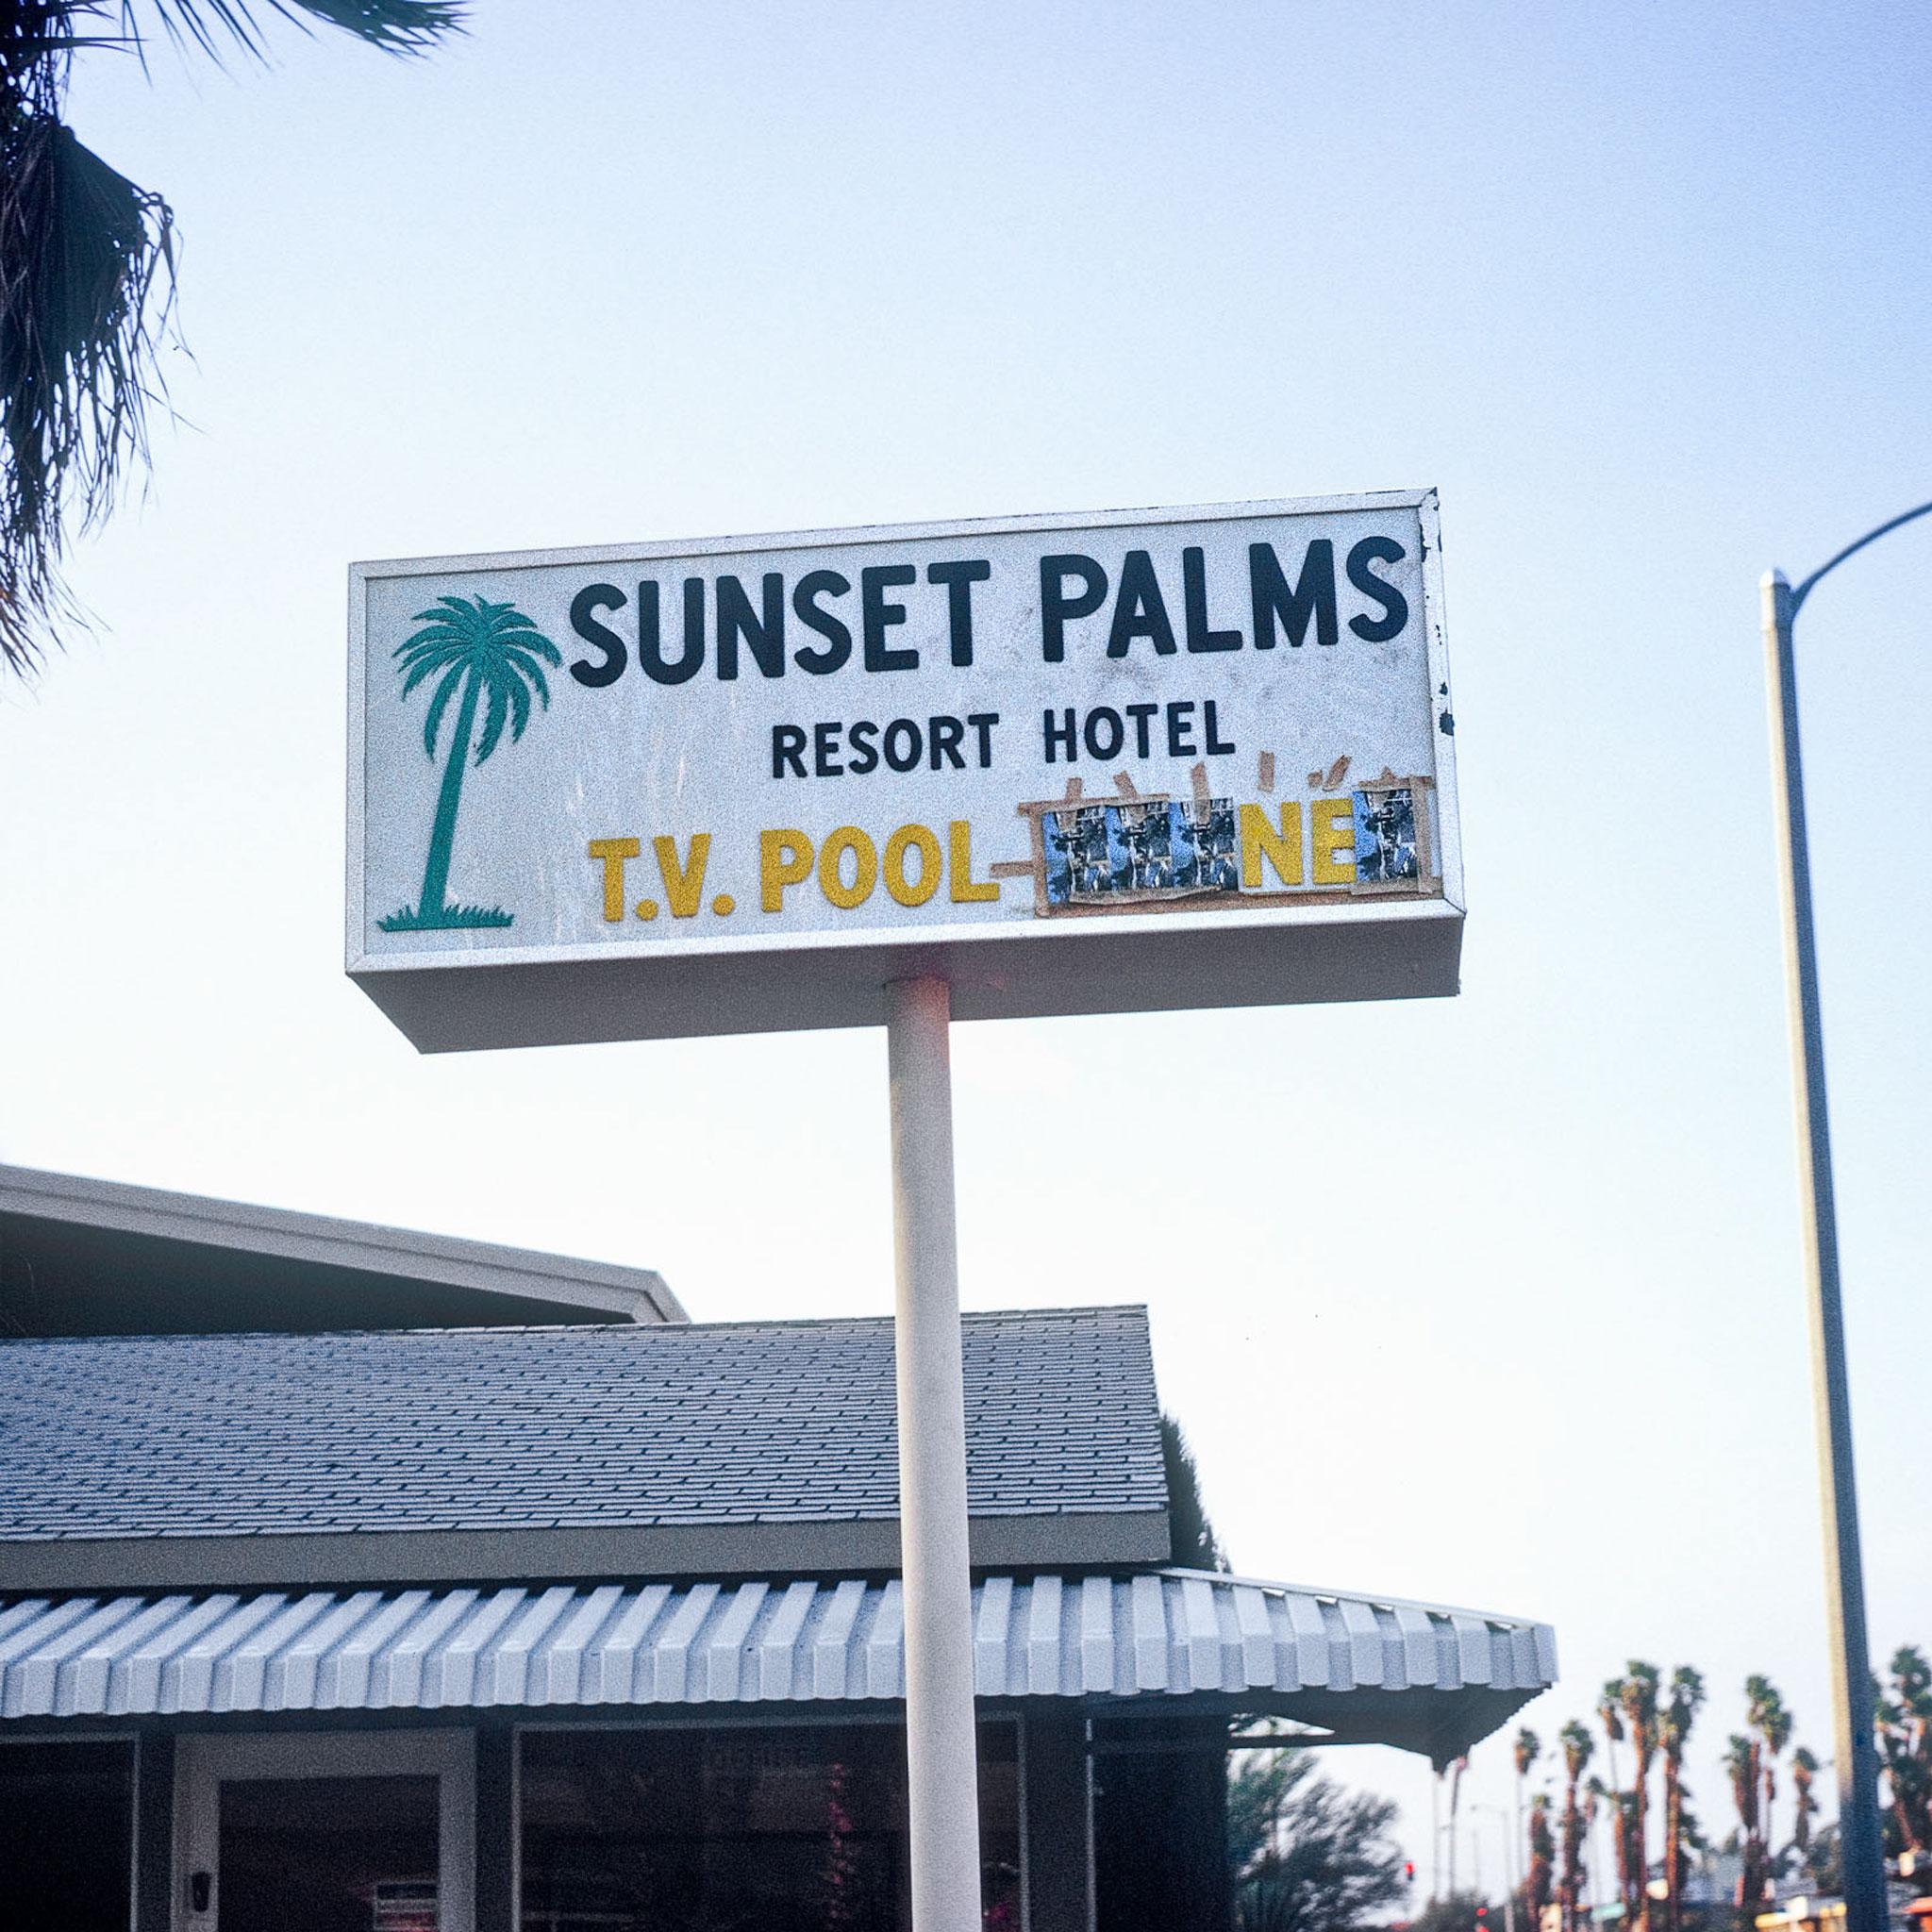 A sign that says "Sunset Palms Resort Hotel T.V. Pool" against a blue sky